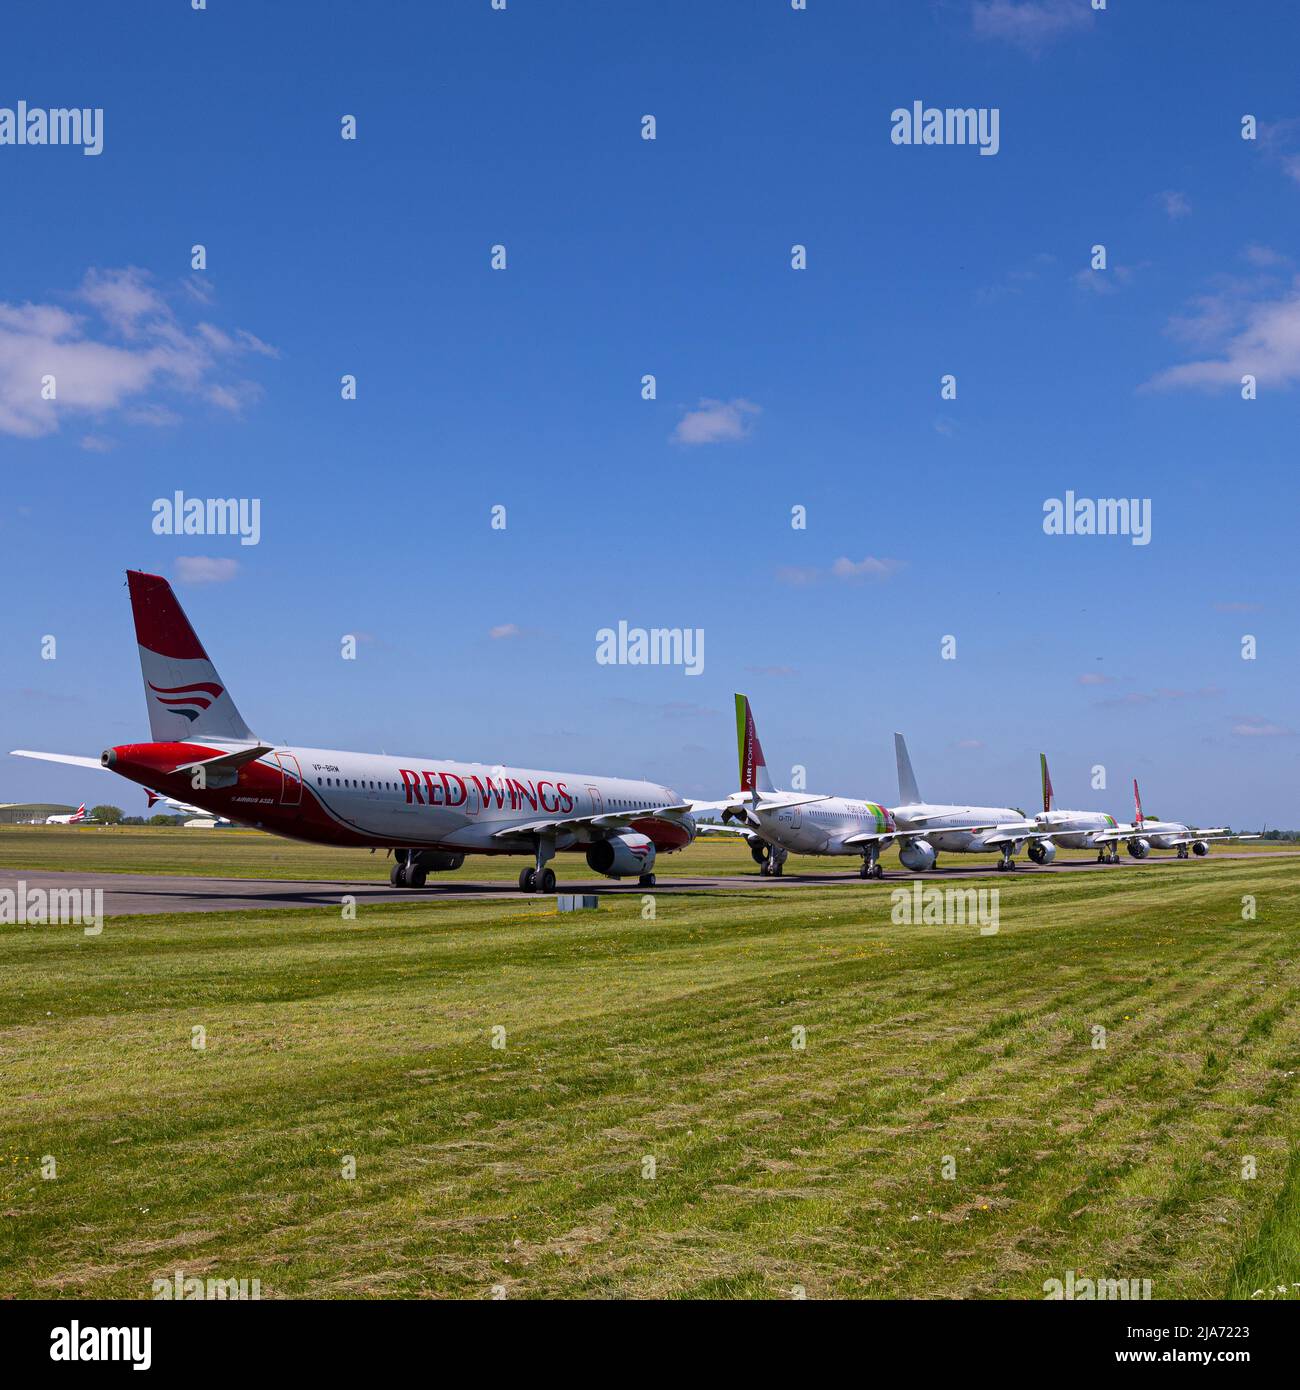 A Selection Of Passenger Planes Which Have Finished .Taking People And Cargo All Around The World Now Being Recycled .At Cotswold Airport In England . Stock Photo